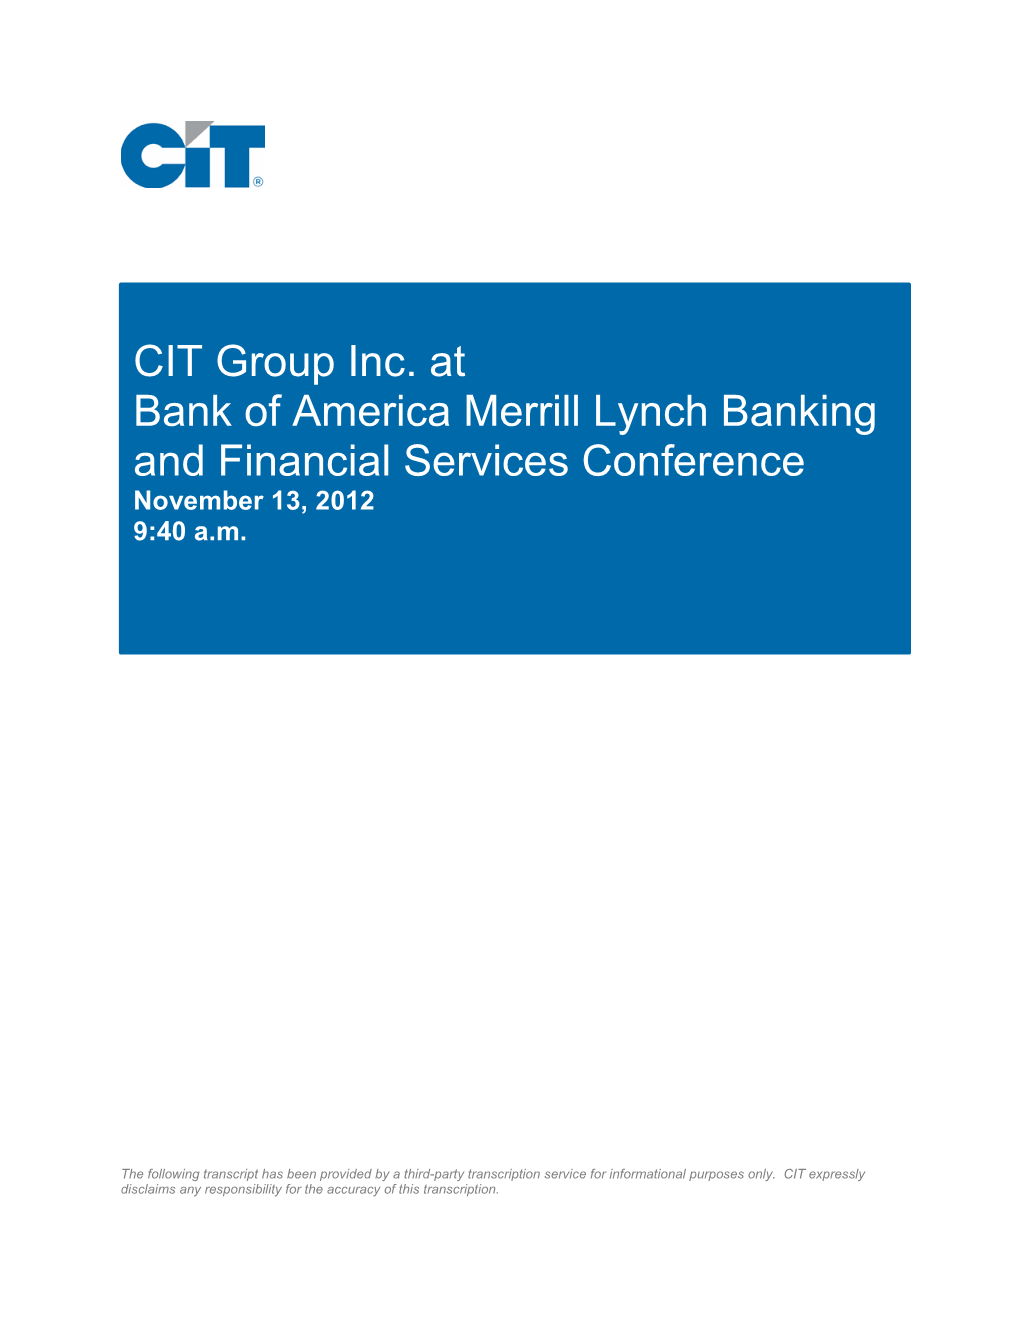 CIT Group Inc. at Bank of America Merrill Lynch Banking and Financial Services Conference 11/13/12 9:40 A.M